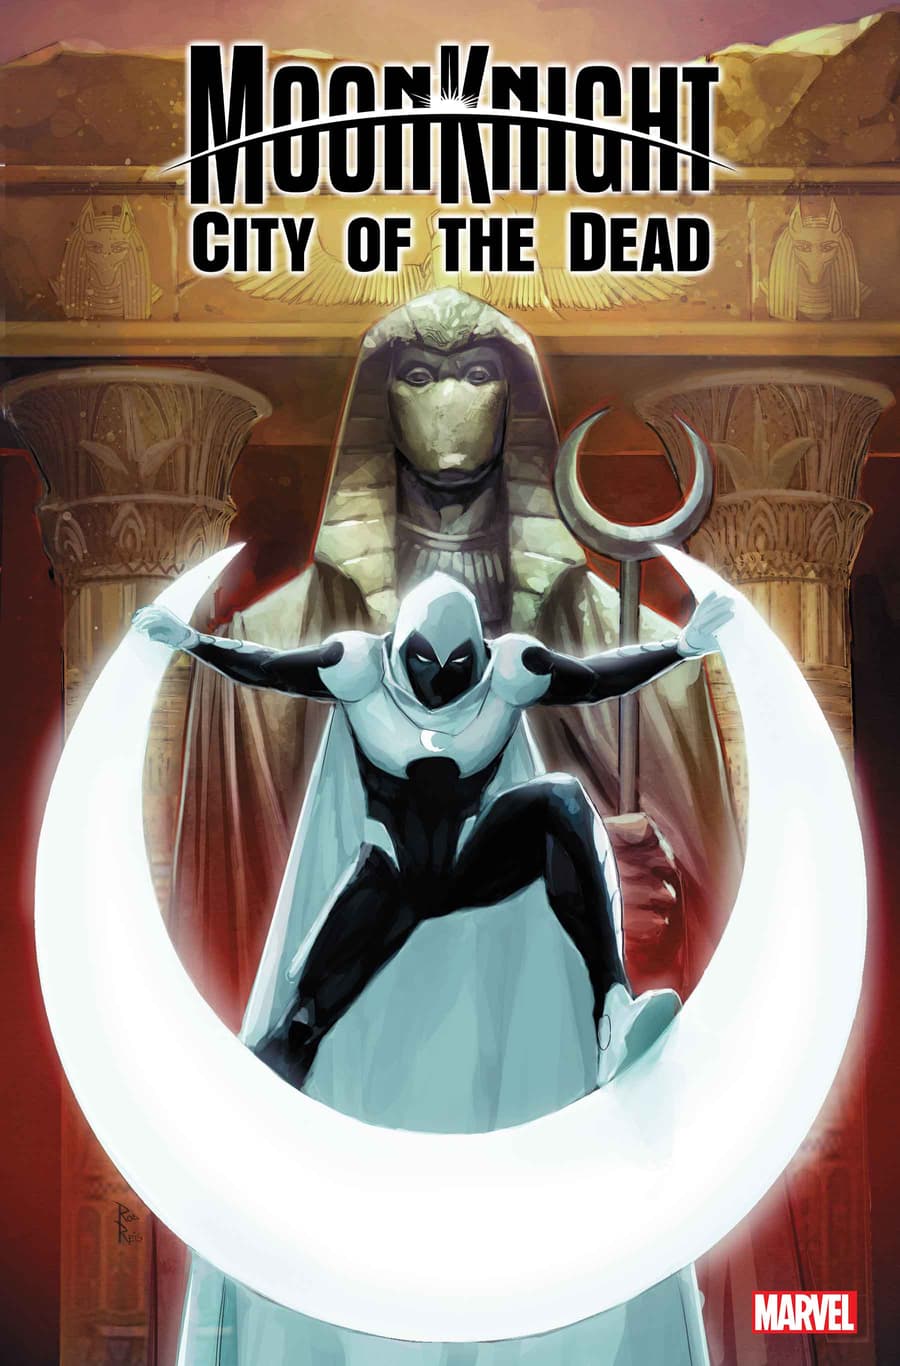 MOON KNIGHT: CITY OF THE DEAD #1 (OF 5)